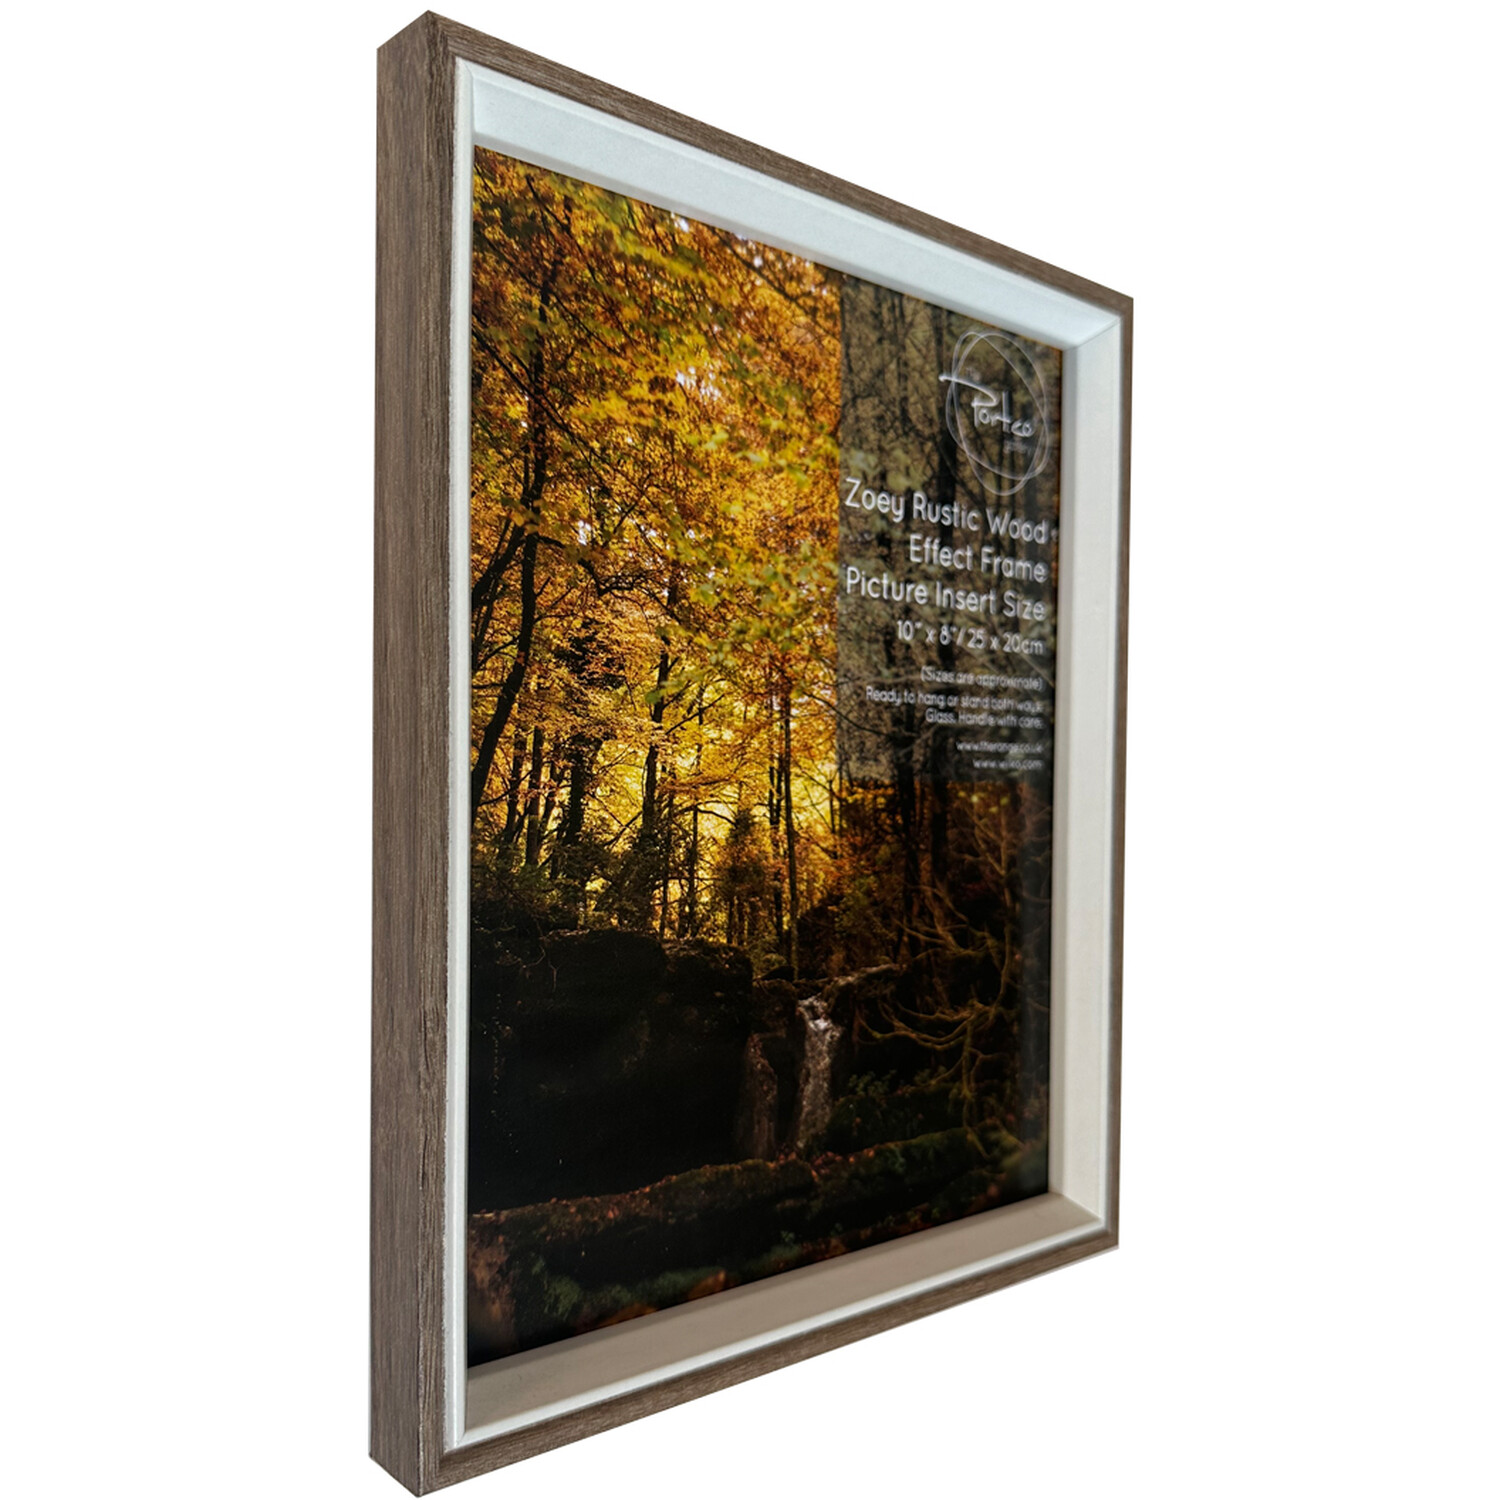 Zoey Rustic Wood Effect Frame - Brown / 10x8in Image 2